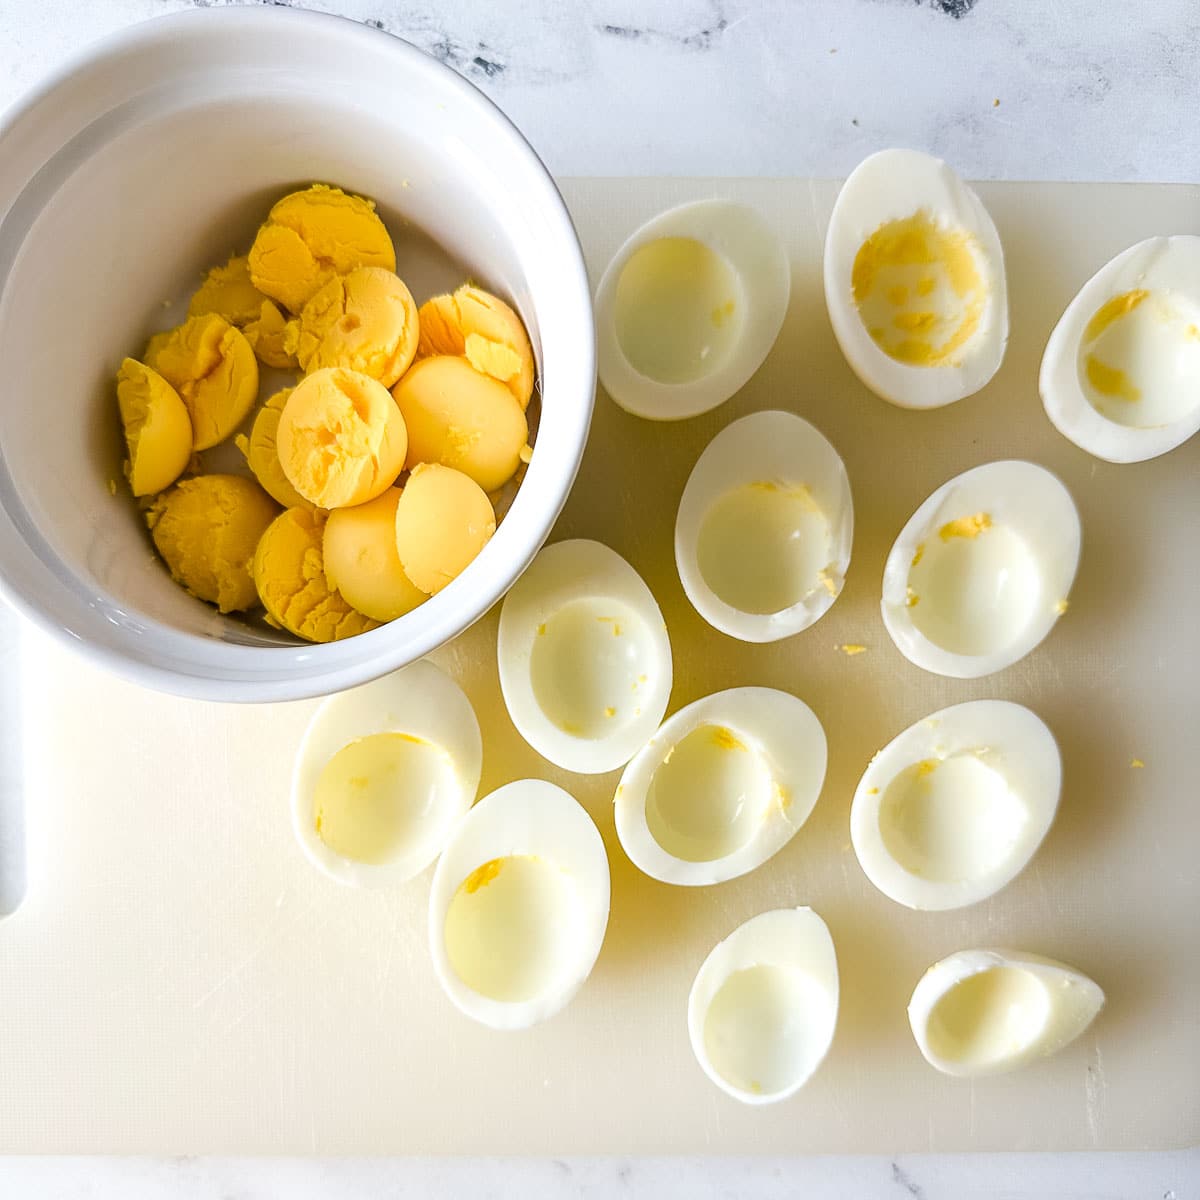 yolks separated from hard-boiled eggs.